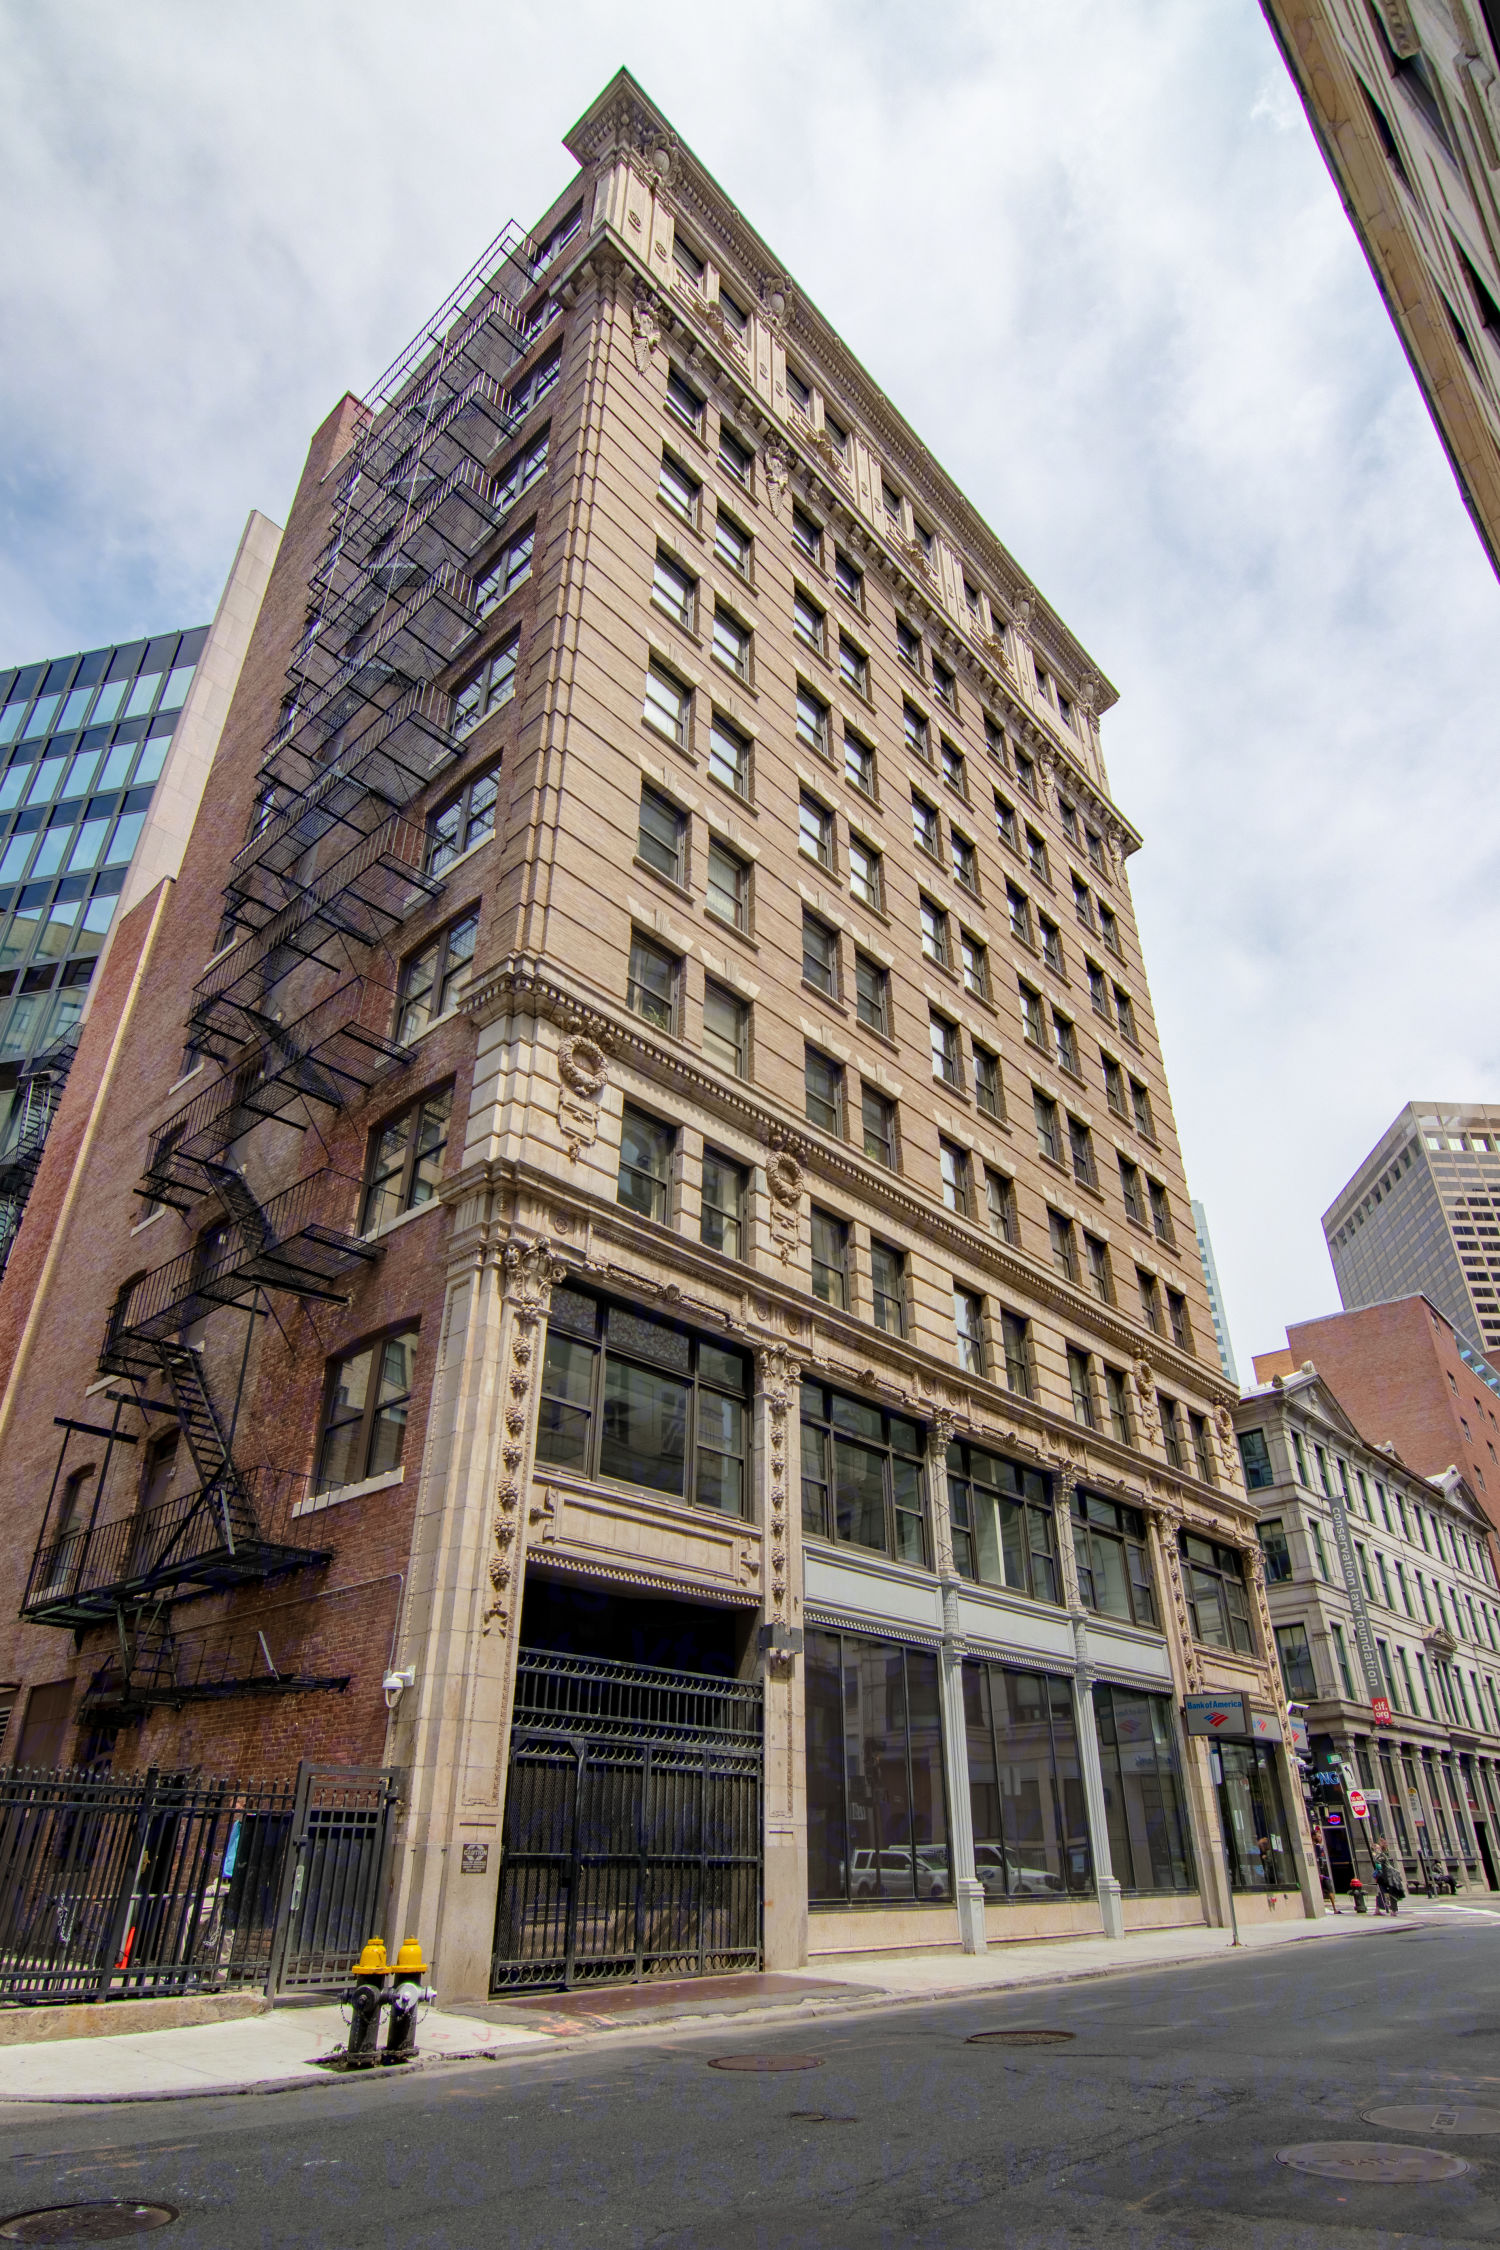 71-77 Summer Street, Boston, MA Commercial Space for Rent | VTS